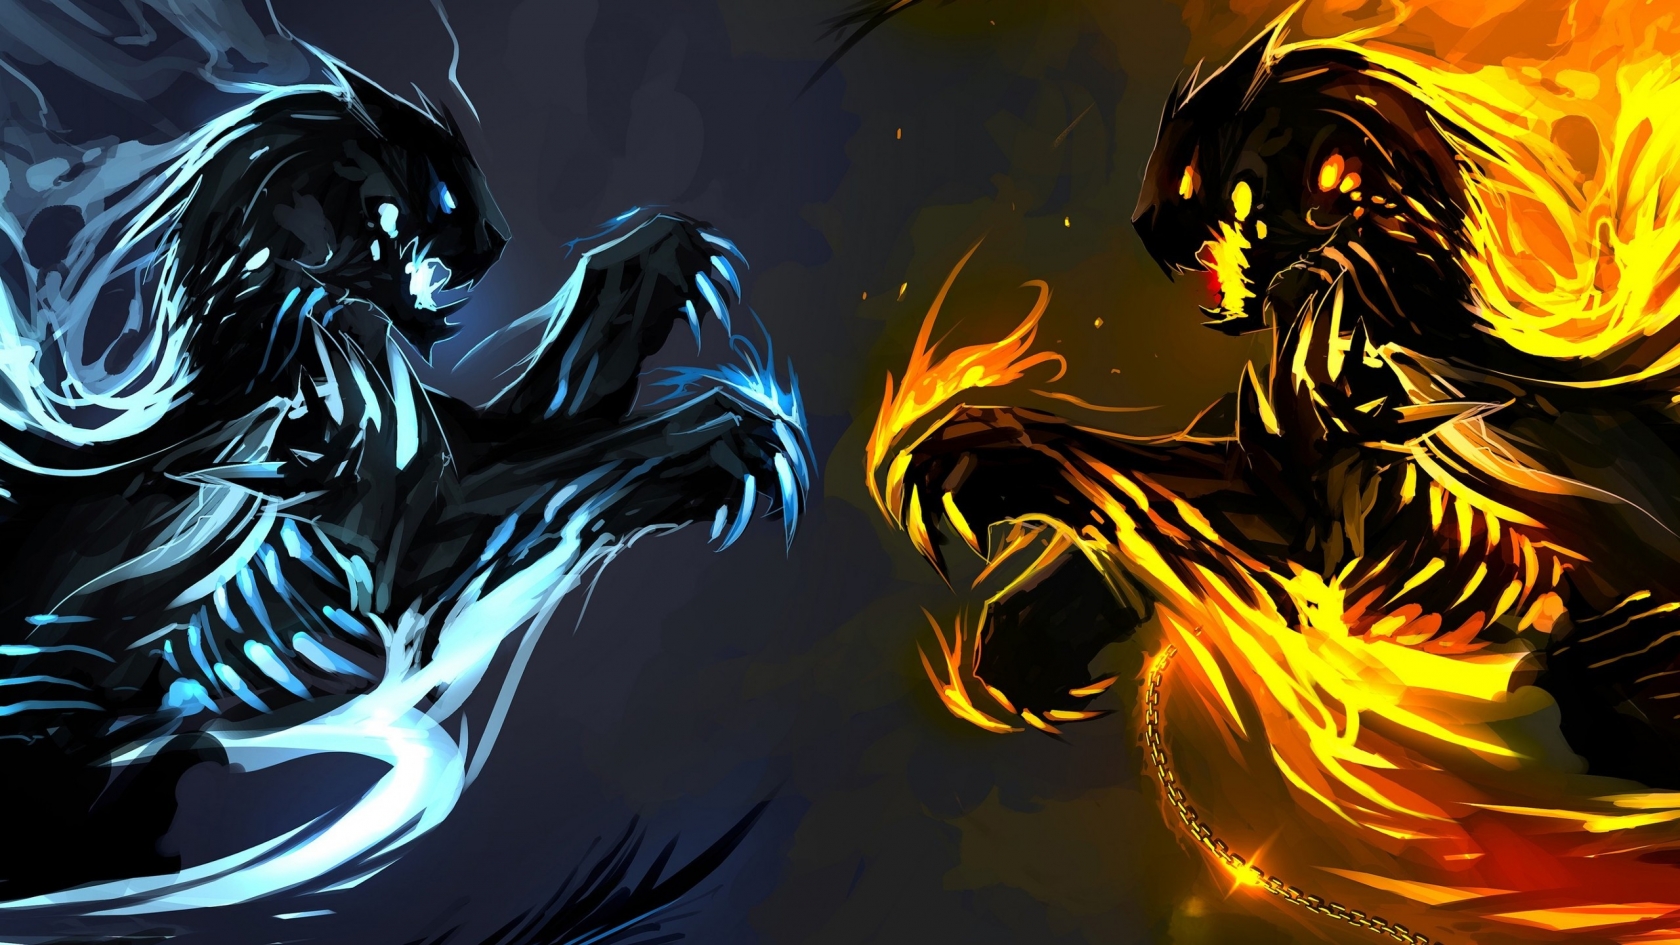 Ice and Fire Dragons for 1680 x 945 HDTV resolution